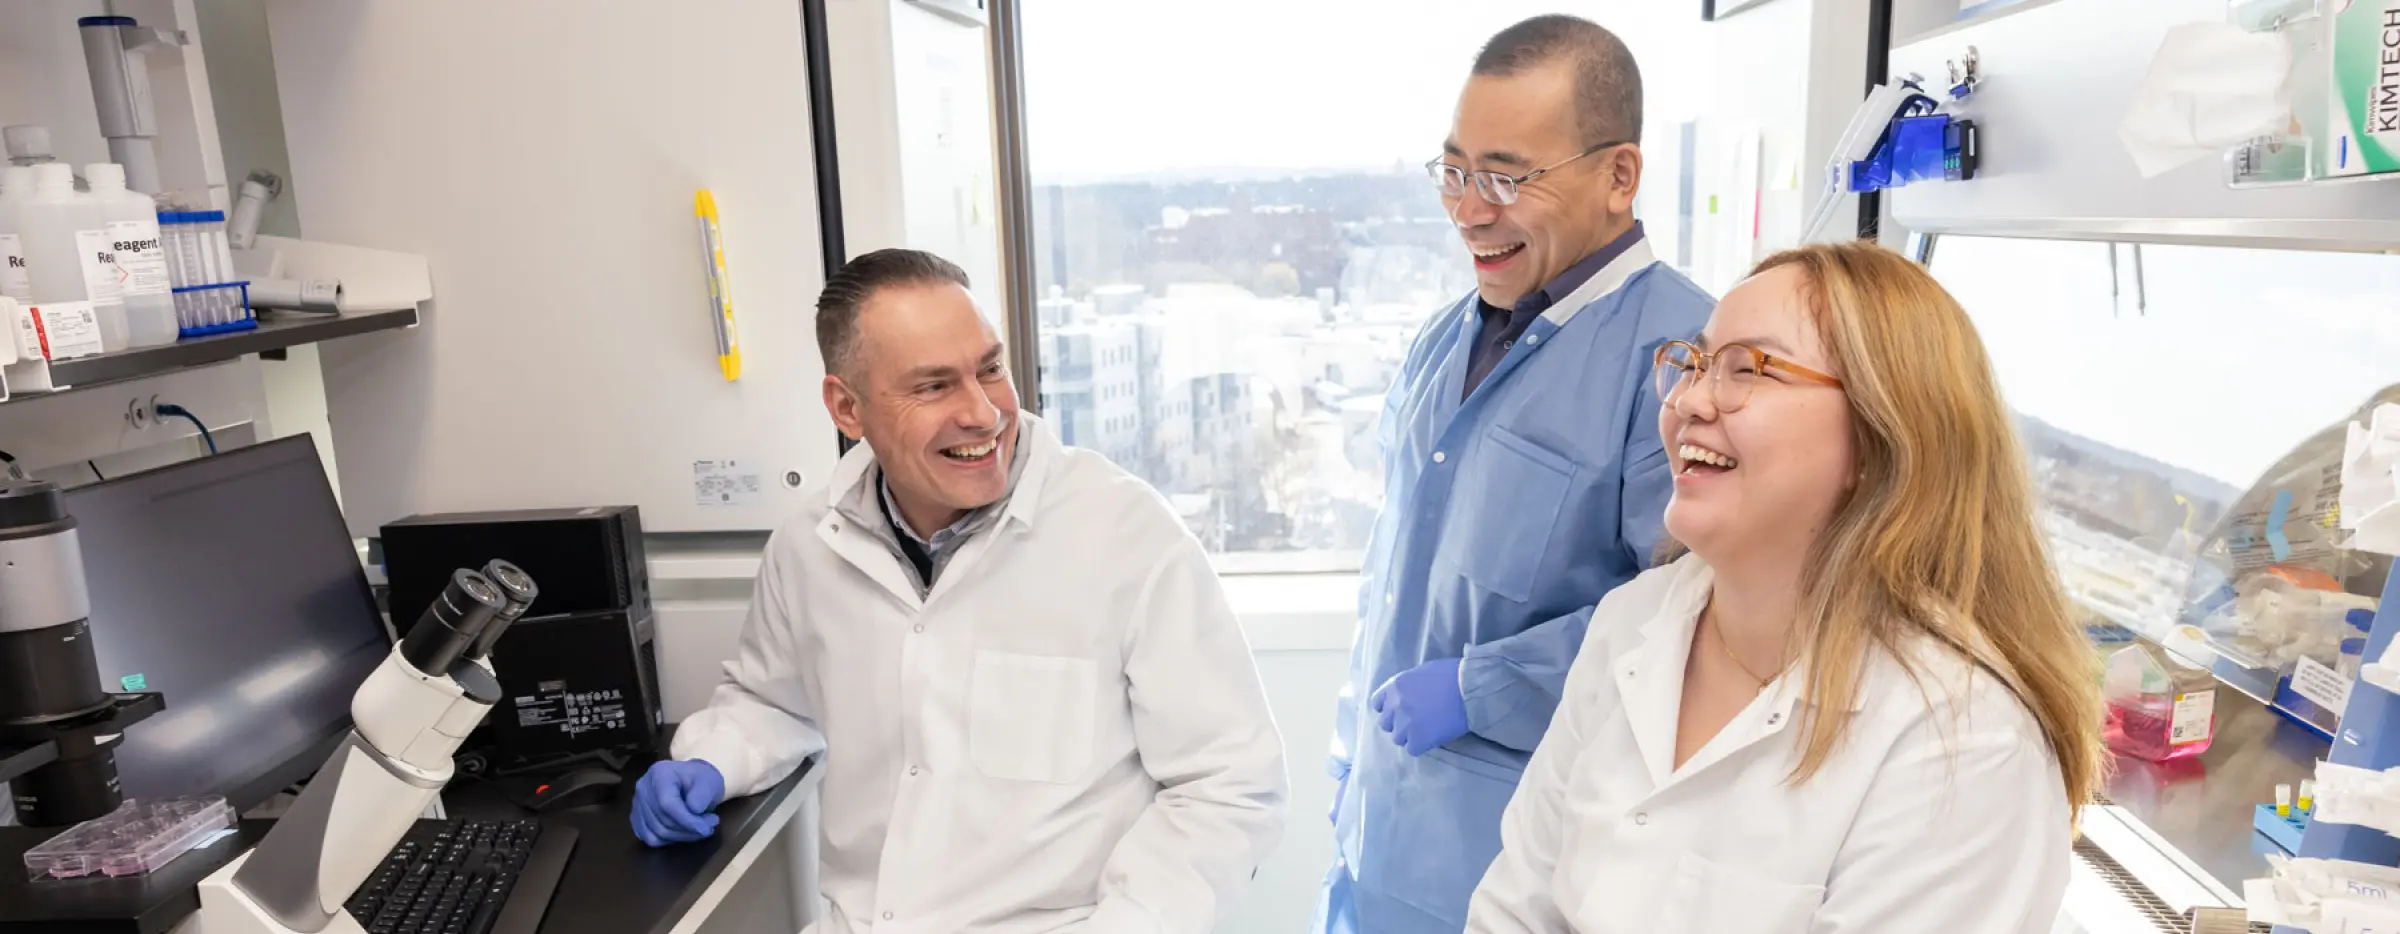 Three colleagues laughing in lab attire.